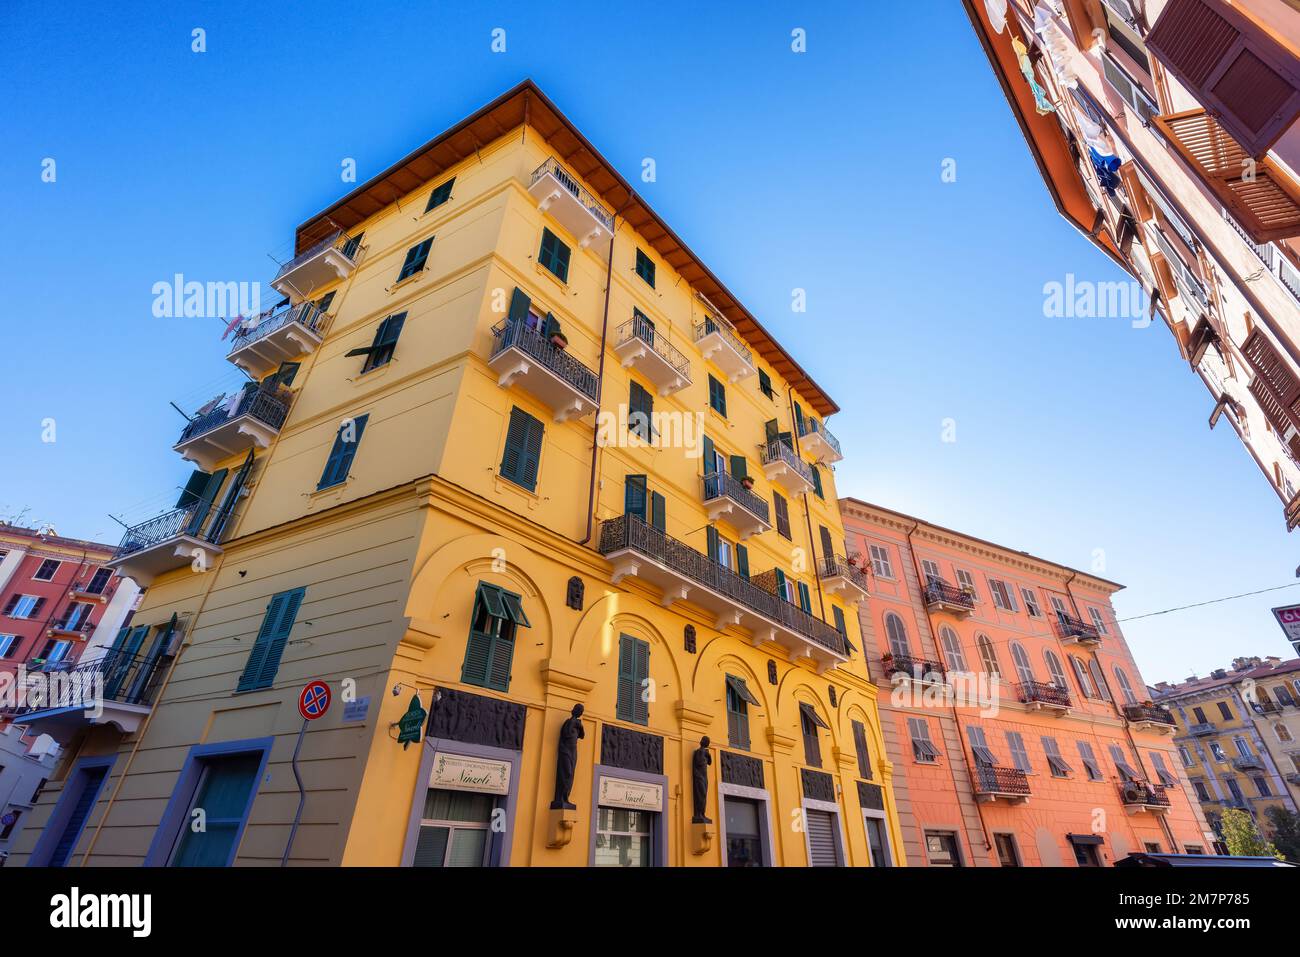 Colorful Residential Apartment Homes in Downtown Streets of La Spezia, Italy. Stock Photo